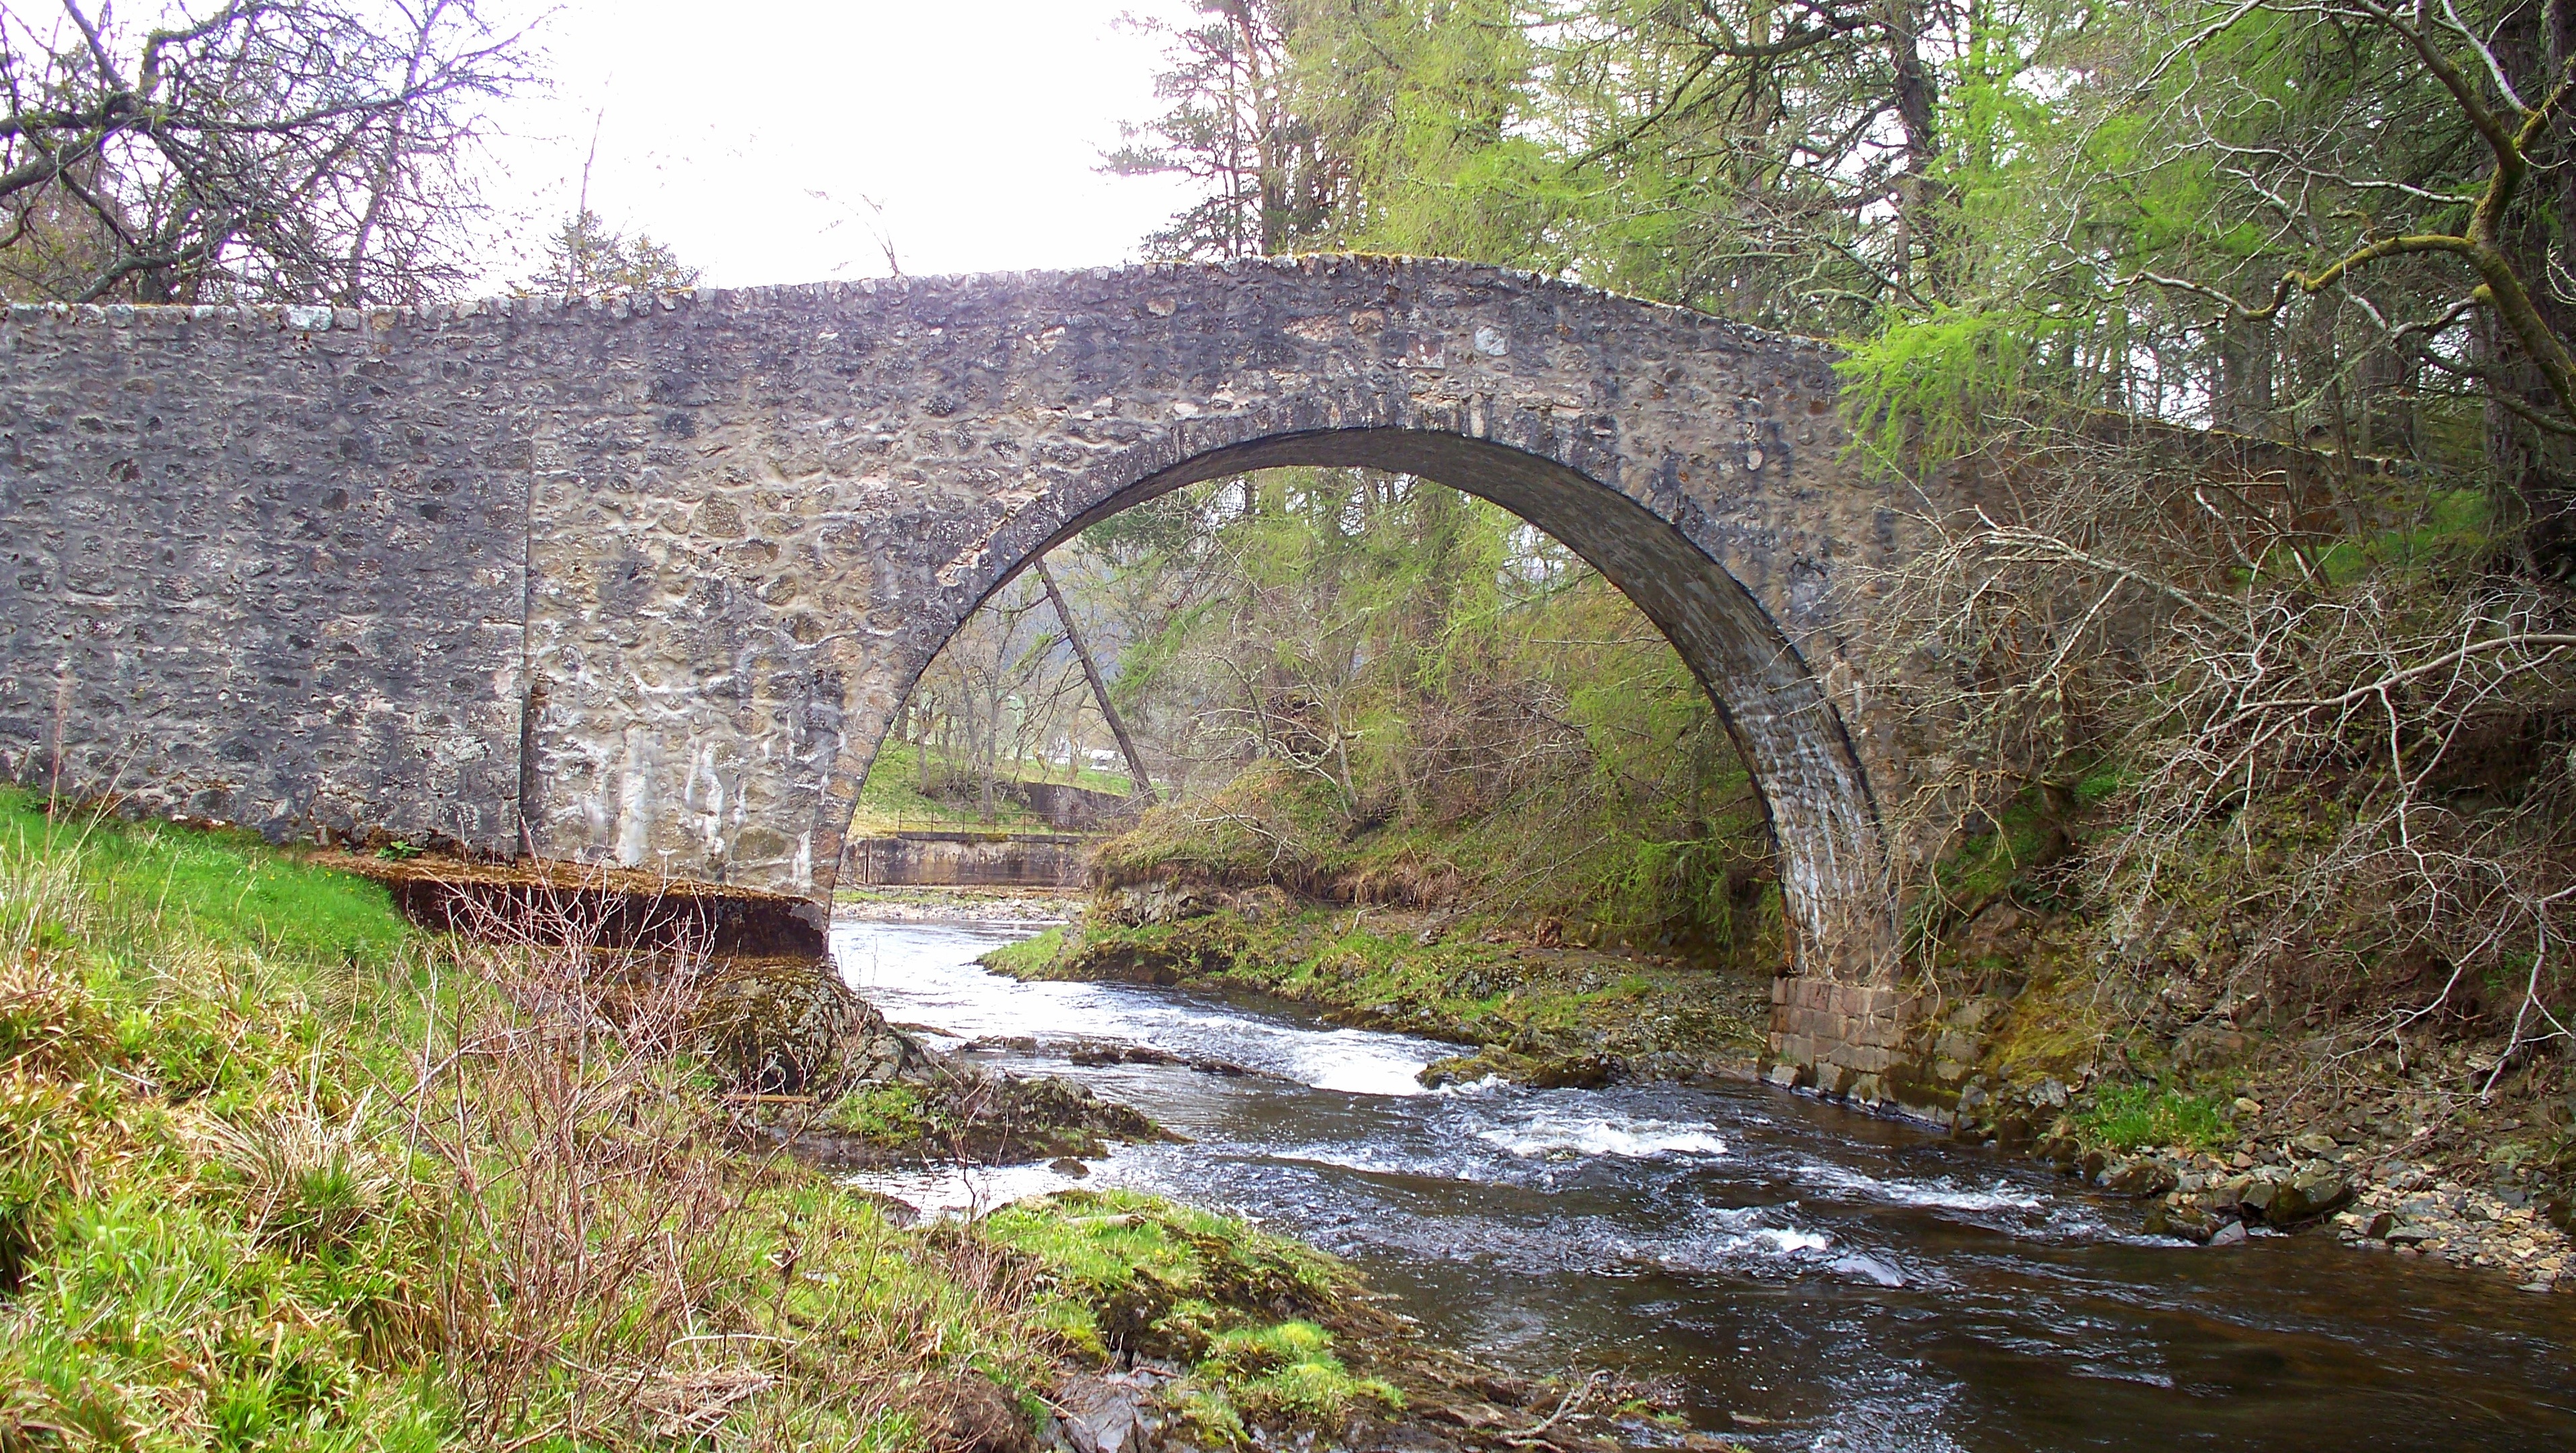 The bridge was first built 300 years ago